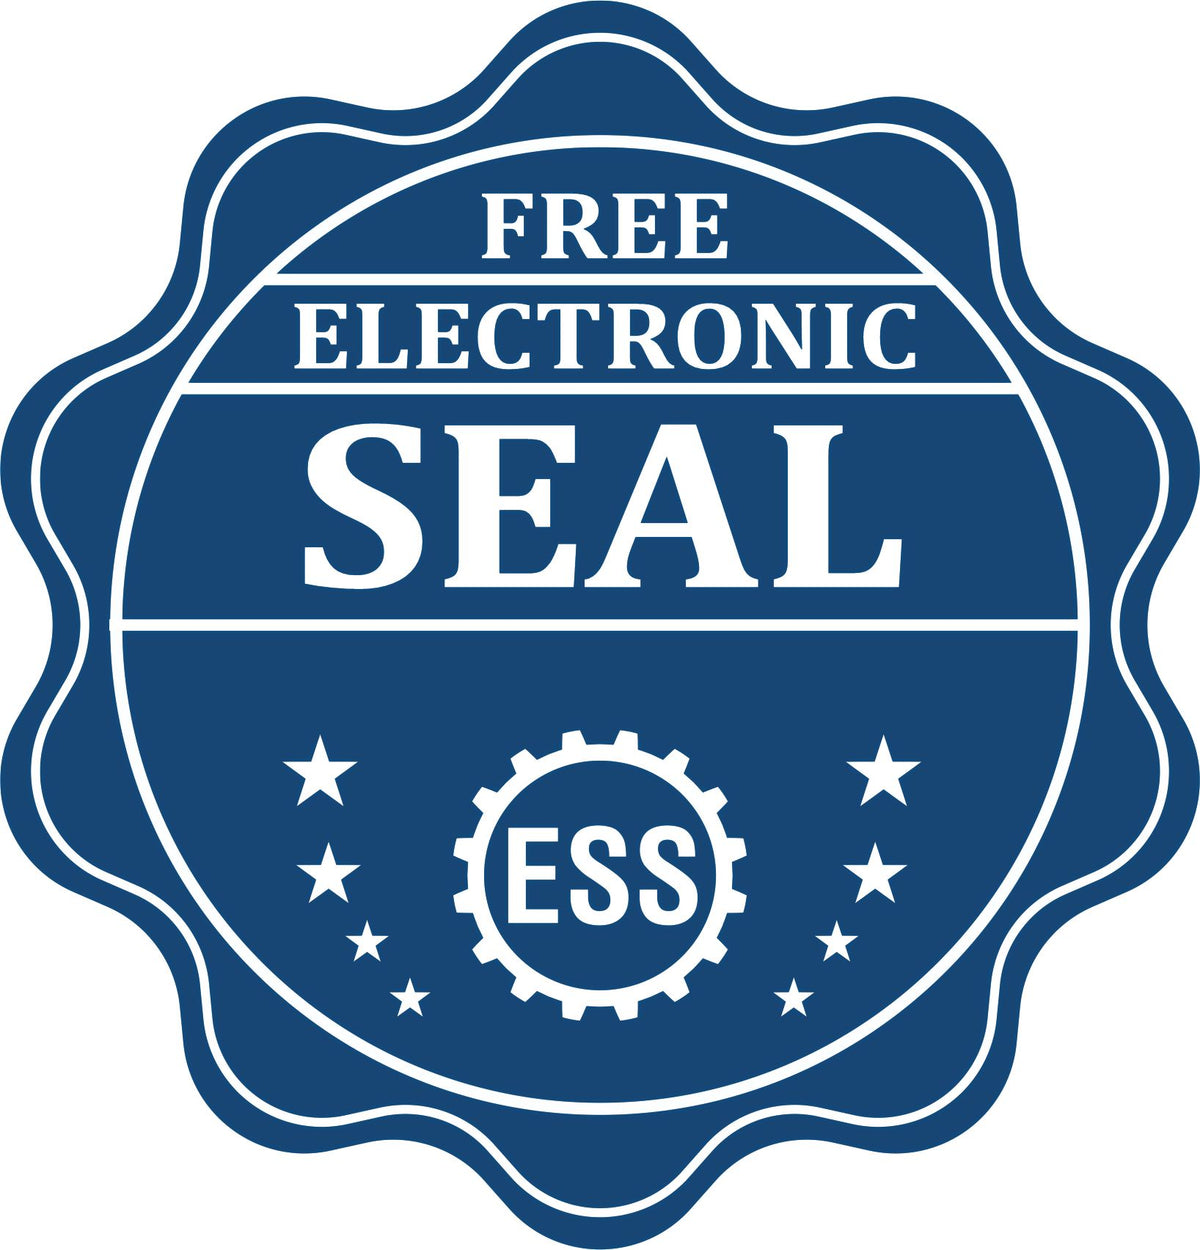 A badge showing a free electronic seal for the Hybrid New Jersey Landscape Architect Seal with stars and the ESS gear on the emblem.